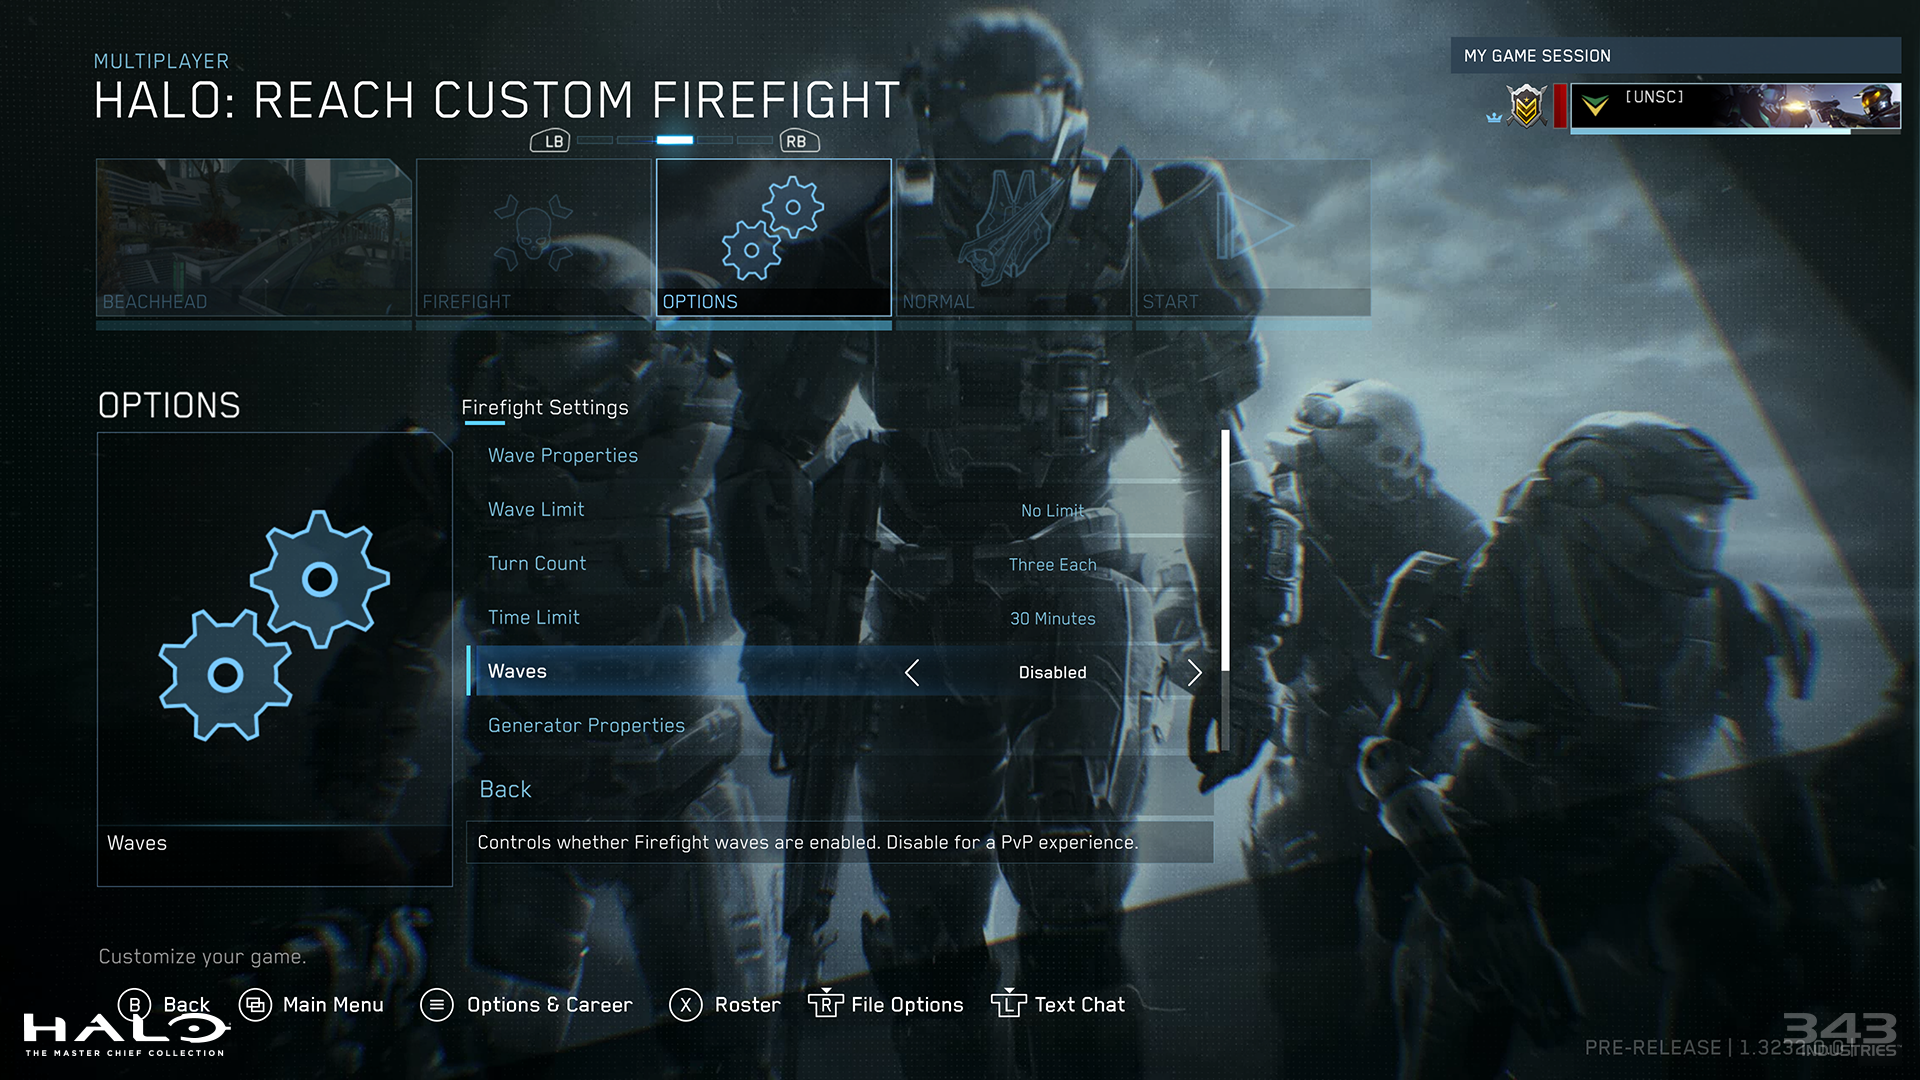 Halo: Reach Firefight options menu screenshot showing how to disable waves